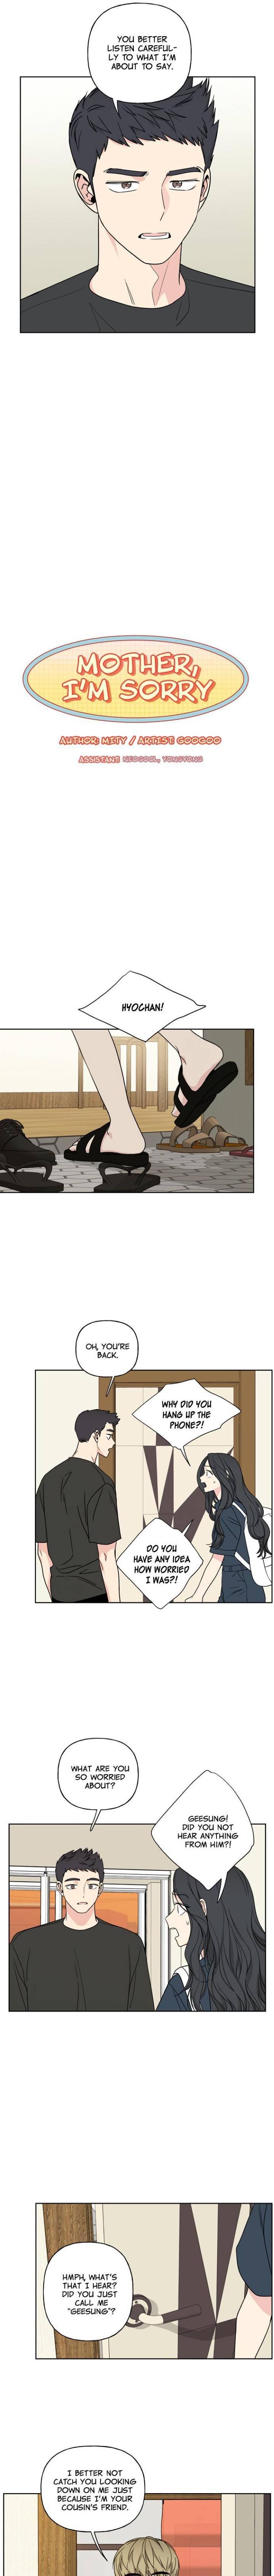 mother-im-sorry-chap-22-1